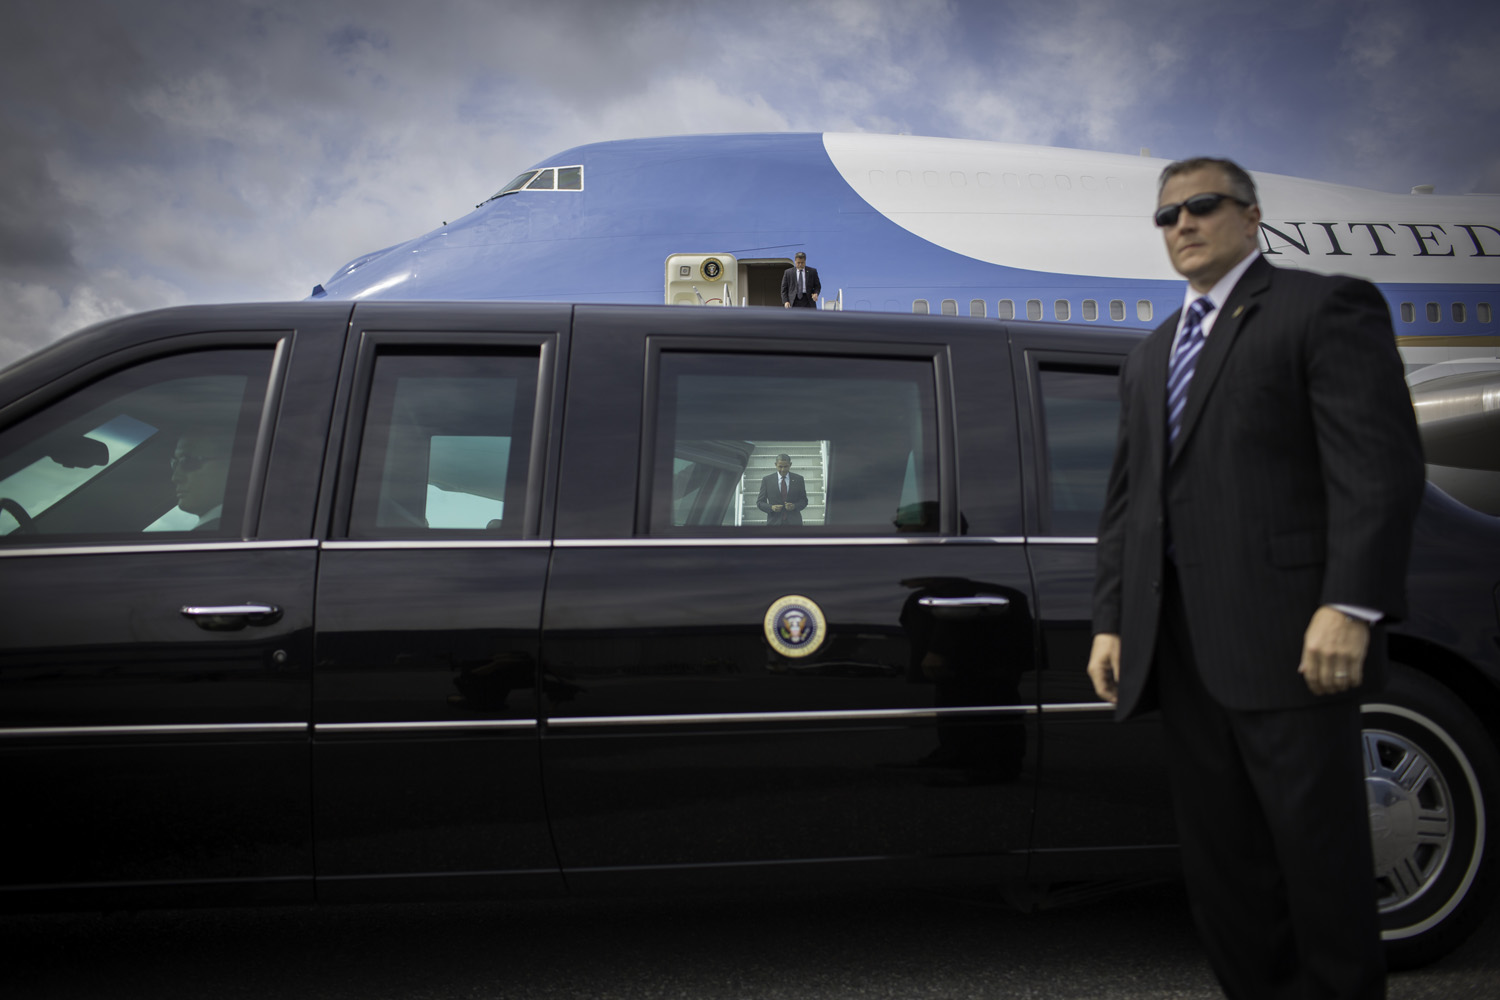 Image: President Obama exits Air Force One upon arriving at the airport in Manchester, N.H. Aug. 18, 2012.